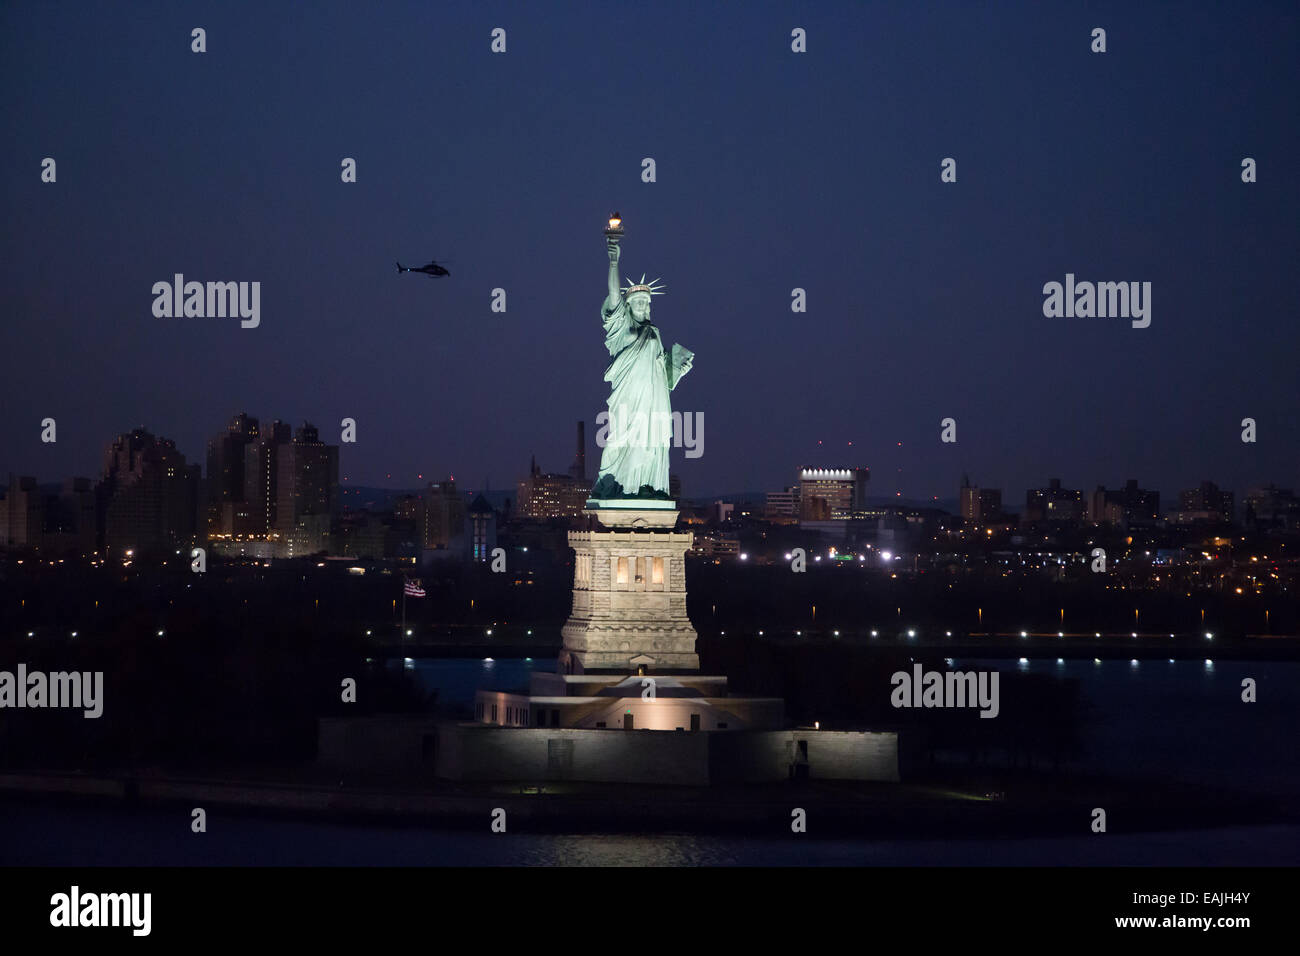 Nighttime photo of the Statue of Liberty in New York harbour, New York, USA. Stock Photo